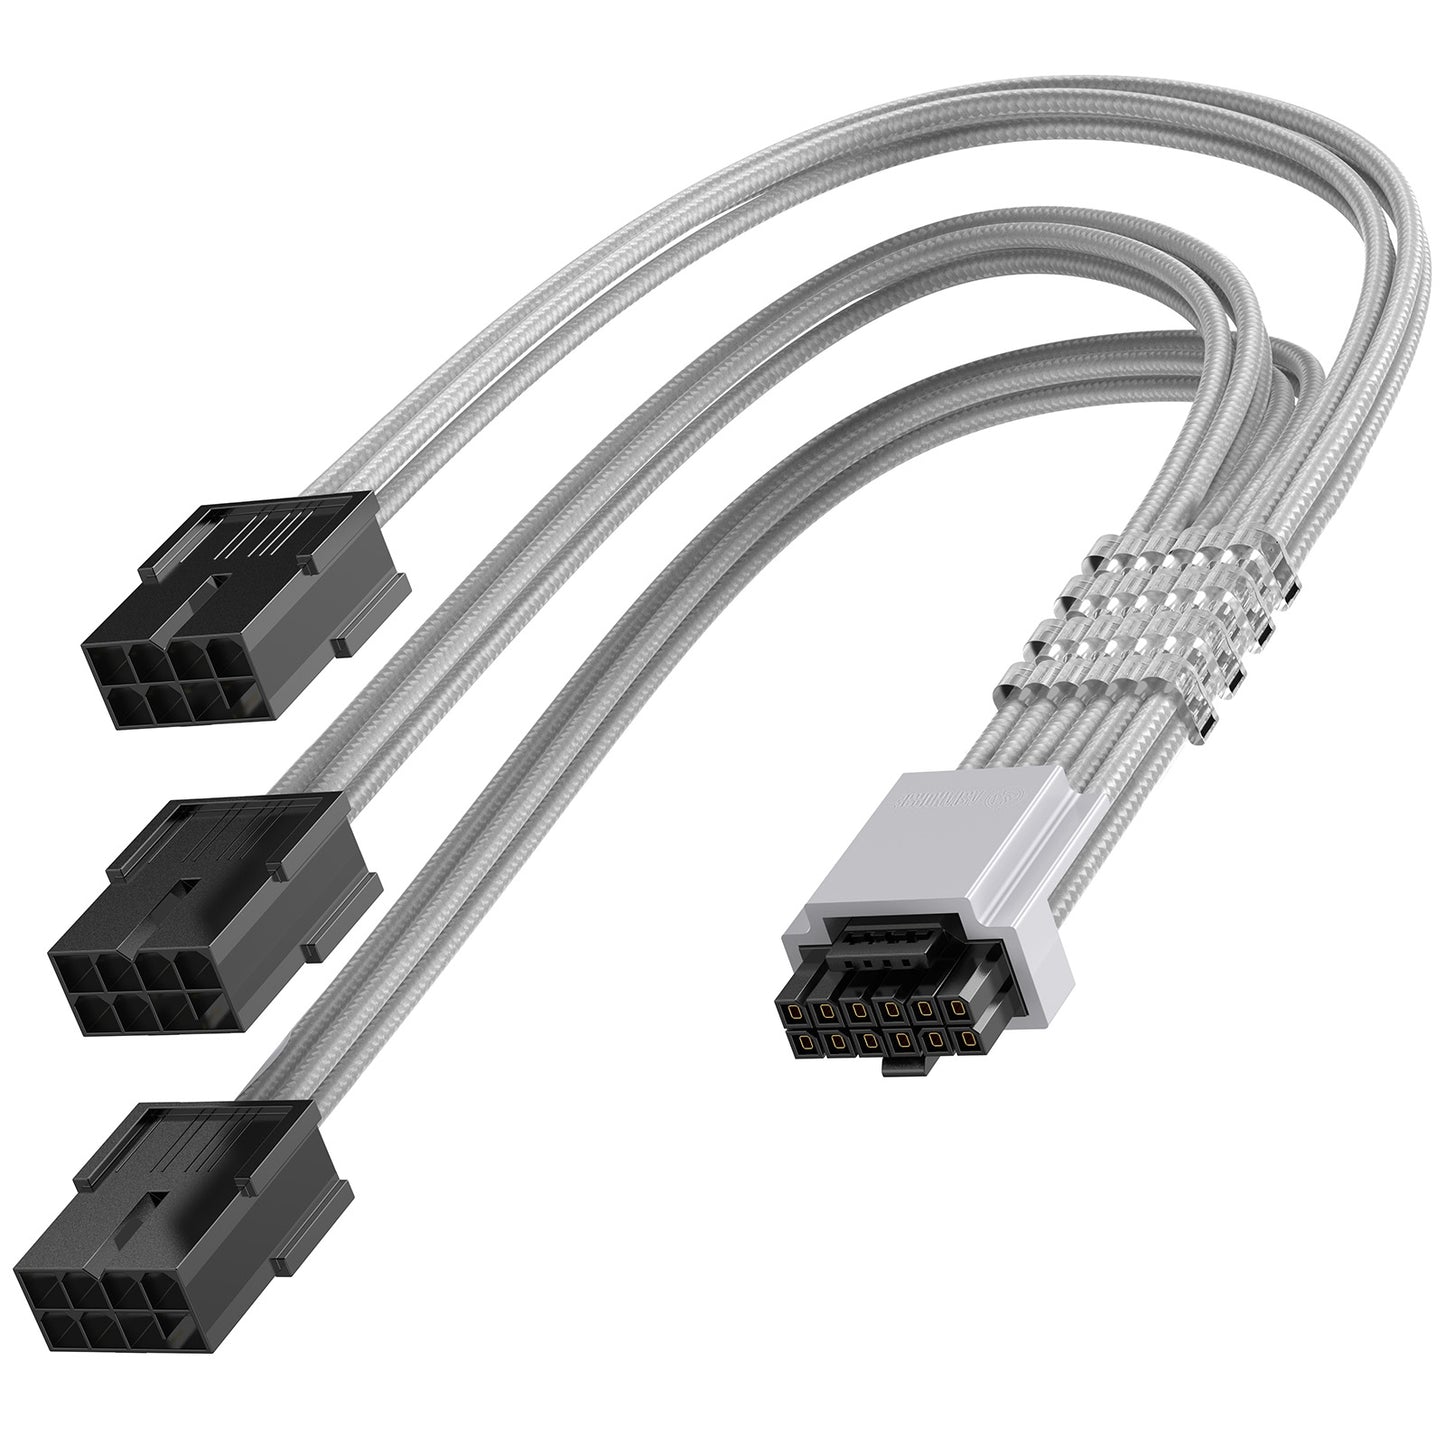 12VHPWR PCI-e Cable Extension, compatible with RTX 3090Ti/4070Ti/4080/4090, length 30 centimeters